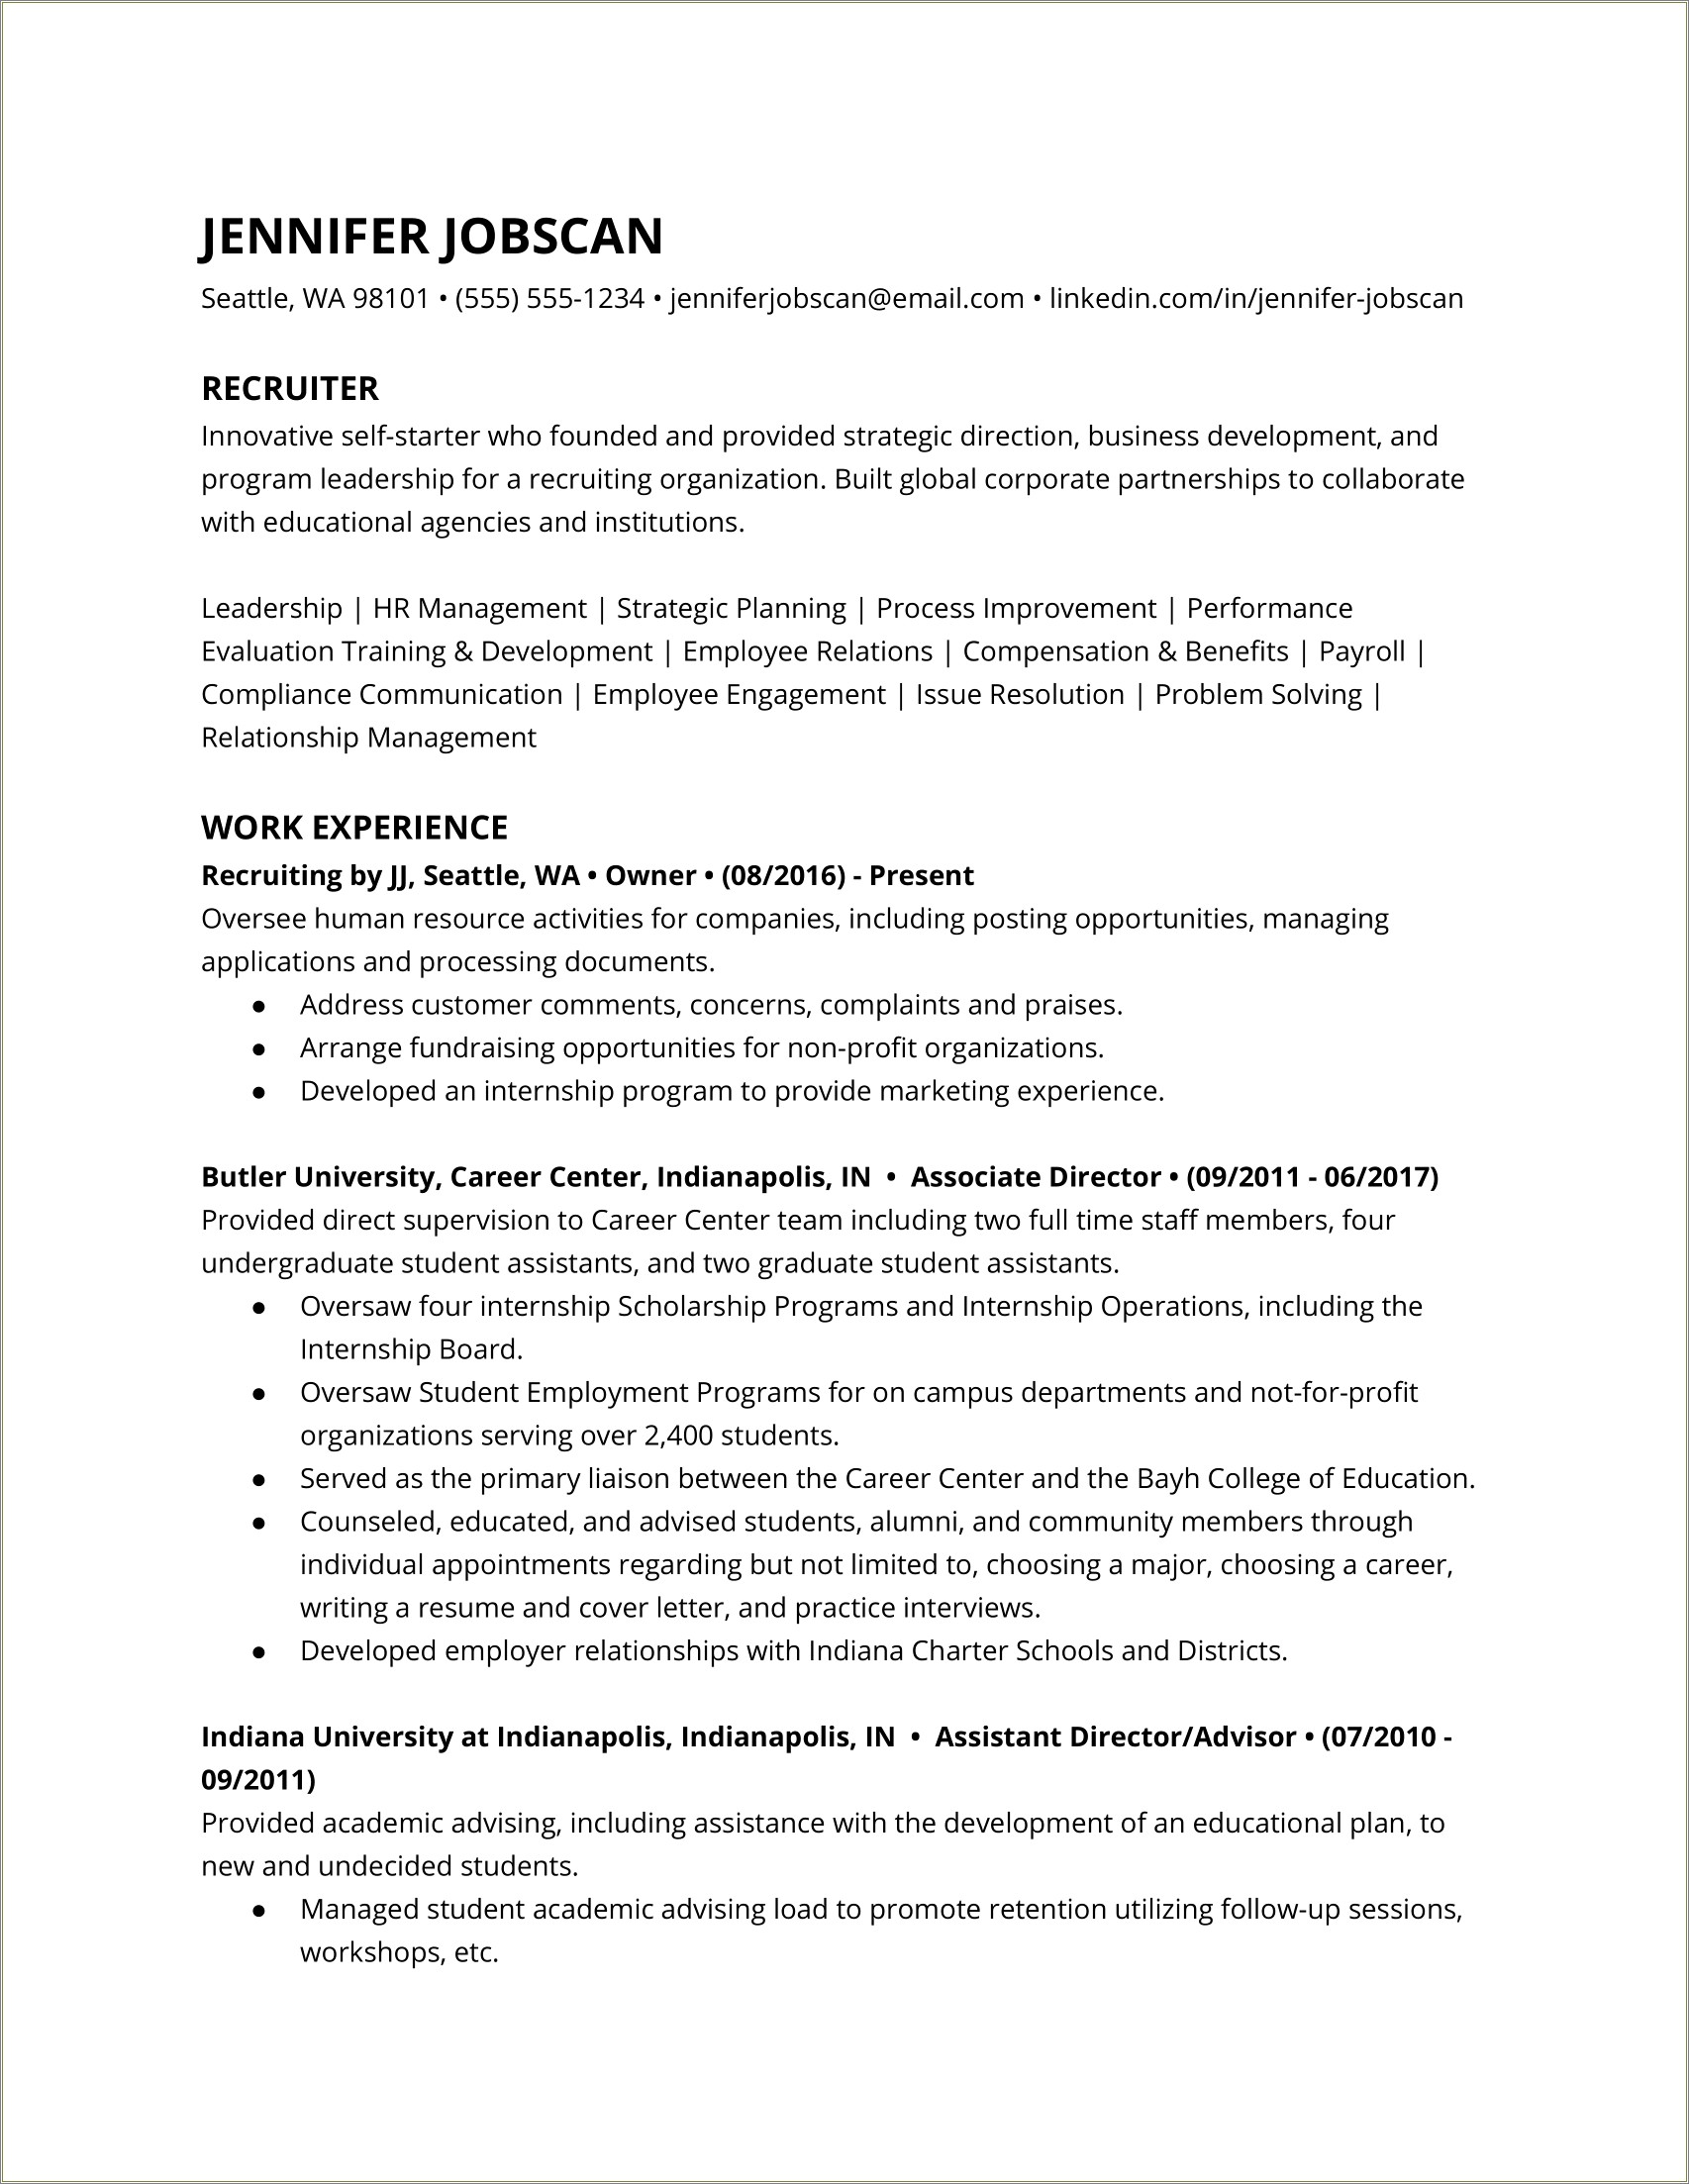 Resume Objective For Career Change To Hr